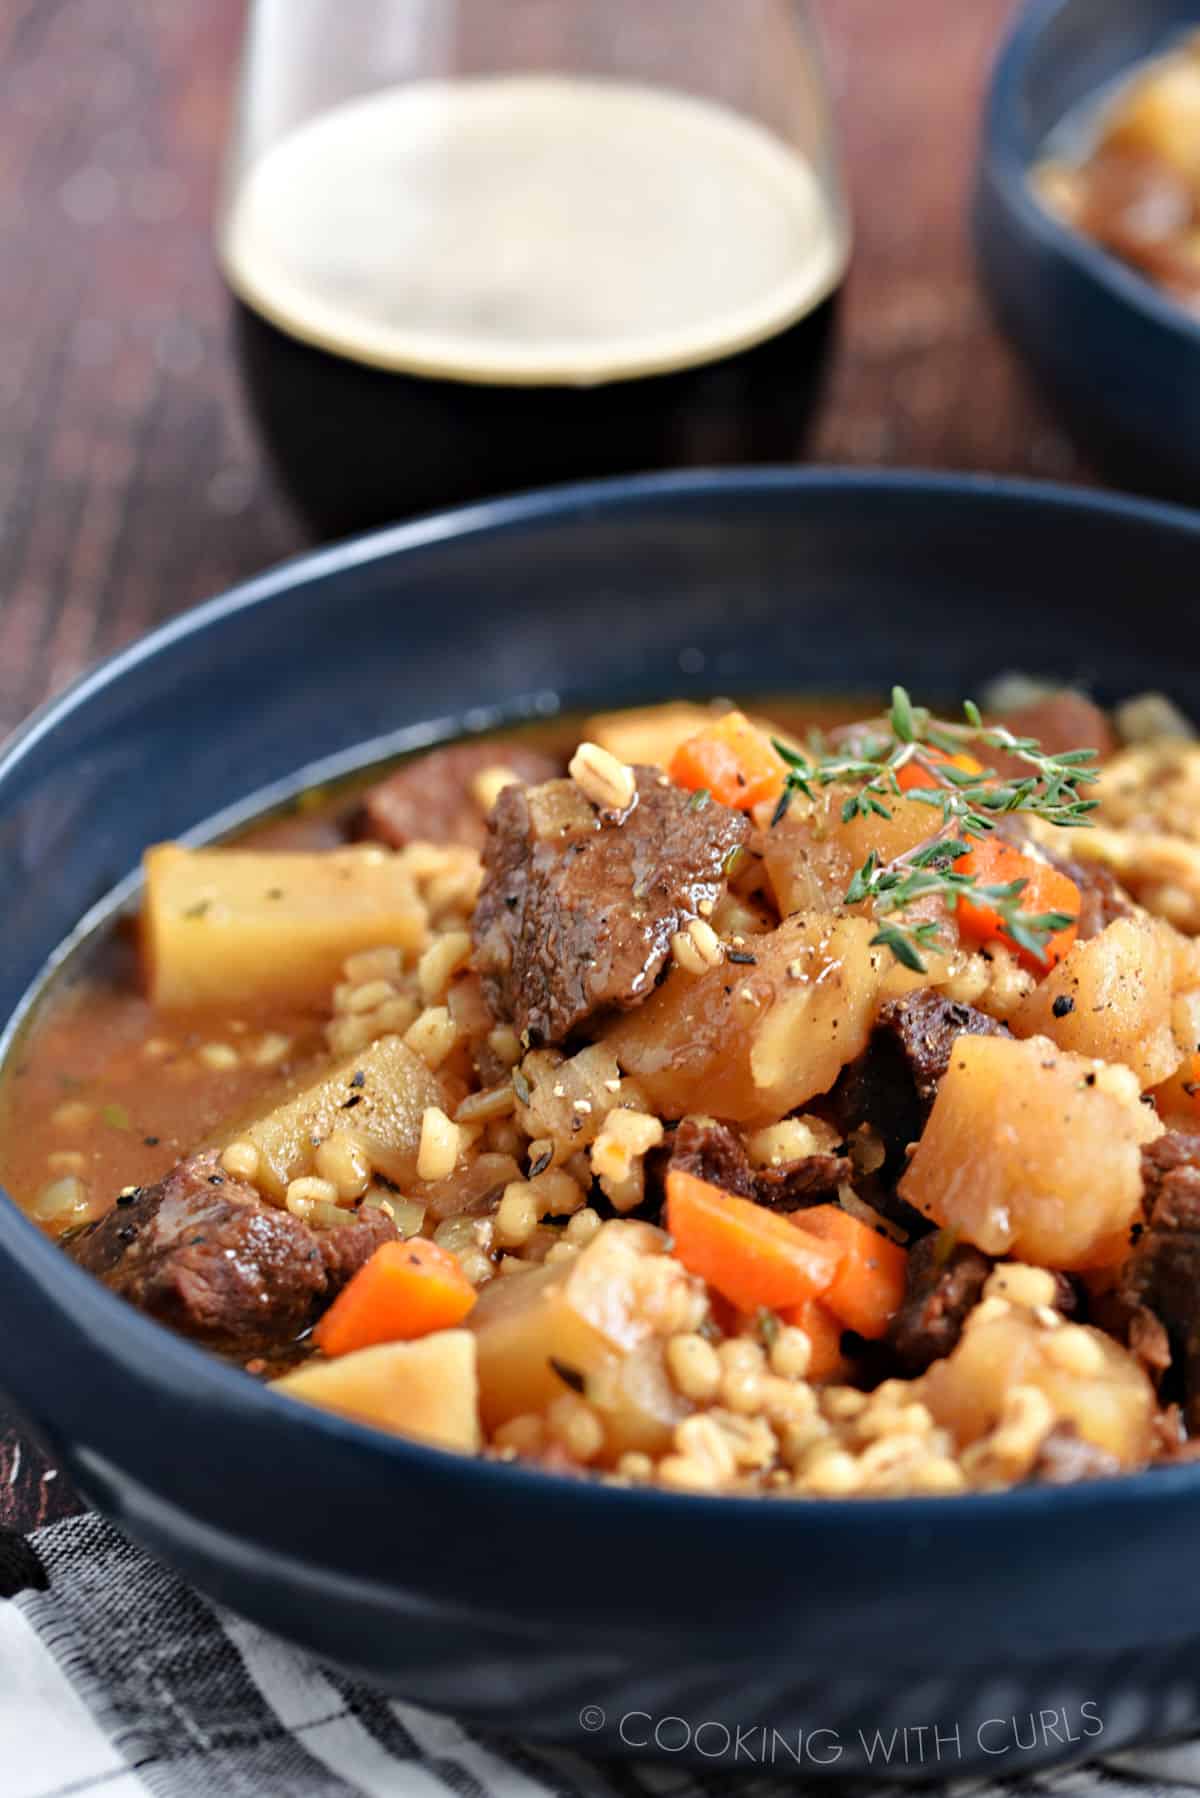 Large chunks of beef, potatoes and carrots surrounded by barley and broth in a blue bowl.